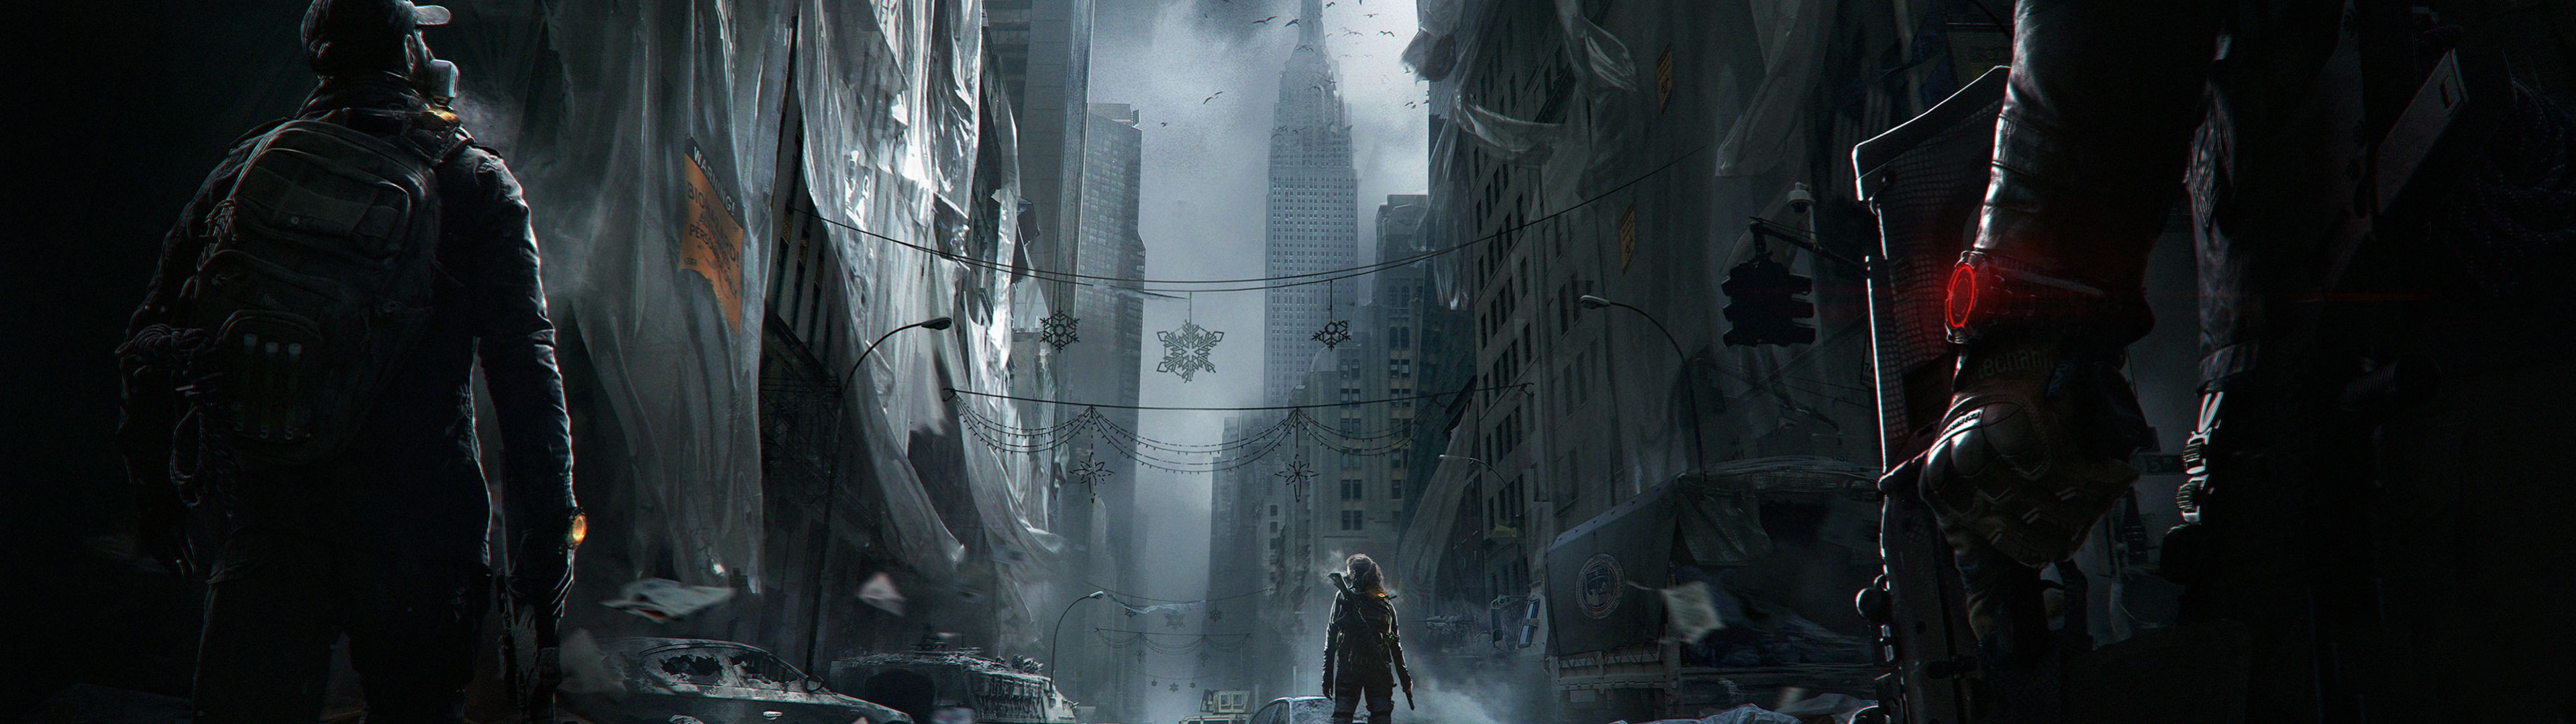 General 3839x1079 video games Tom Clancy's The Division concept art PC gaming video game art